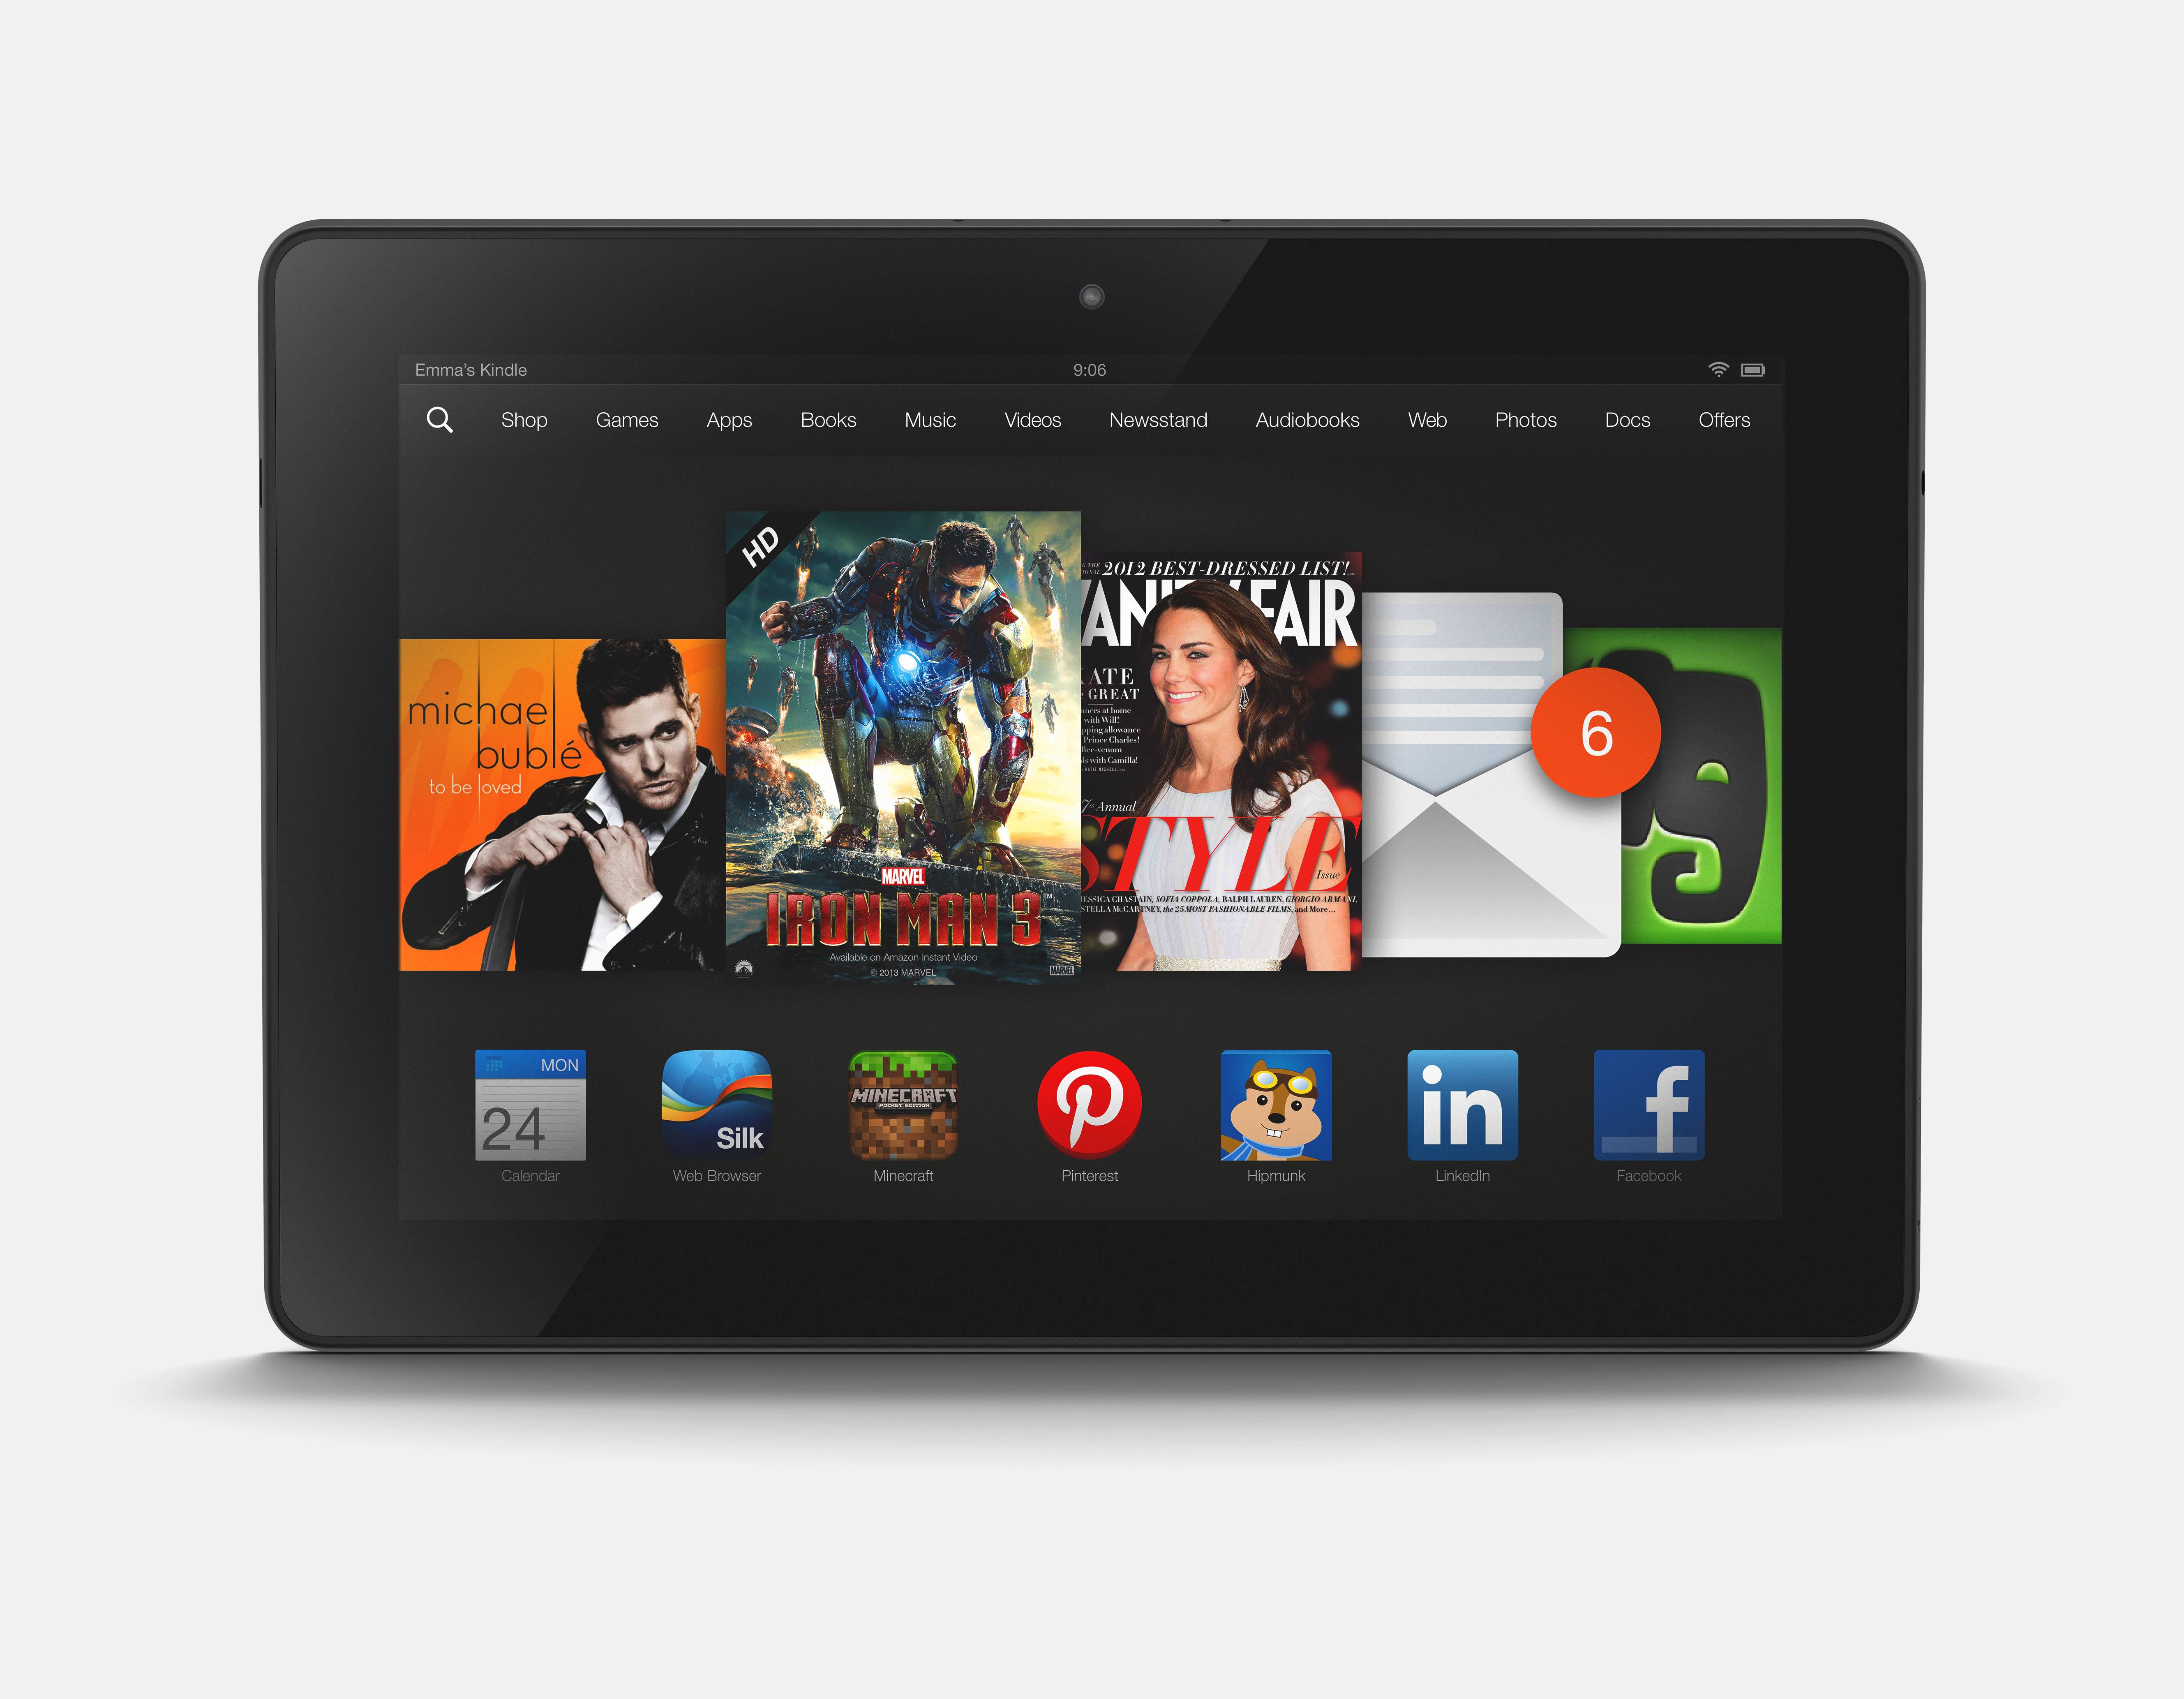 Amazon Kindle Fire HDX 7 and 8.9 official Snapdragon 800, starting at